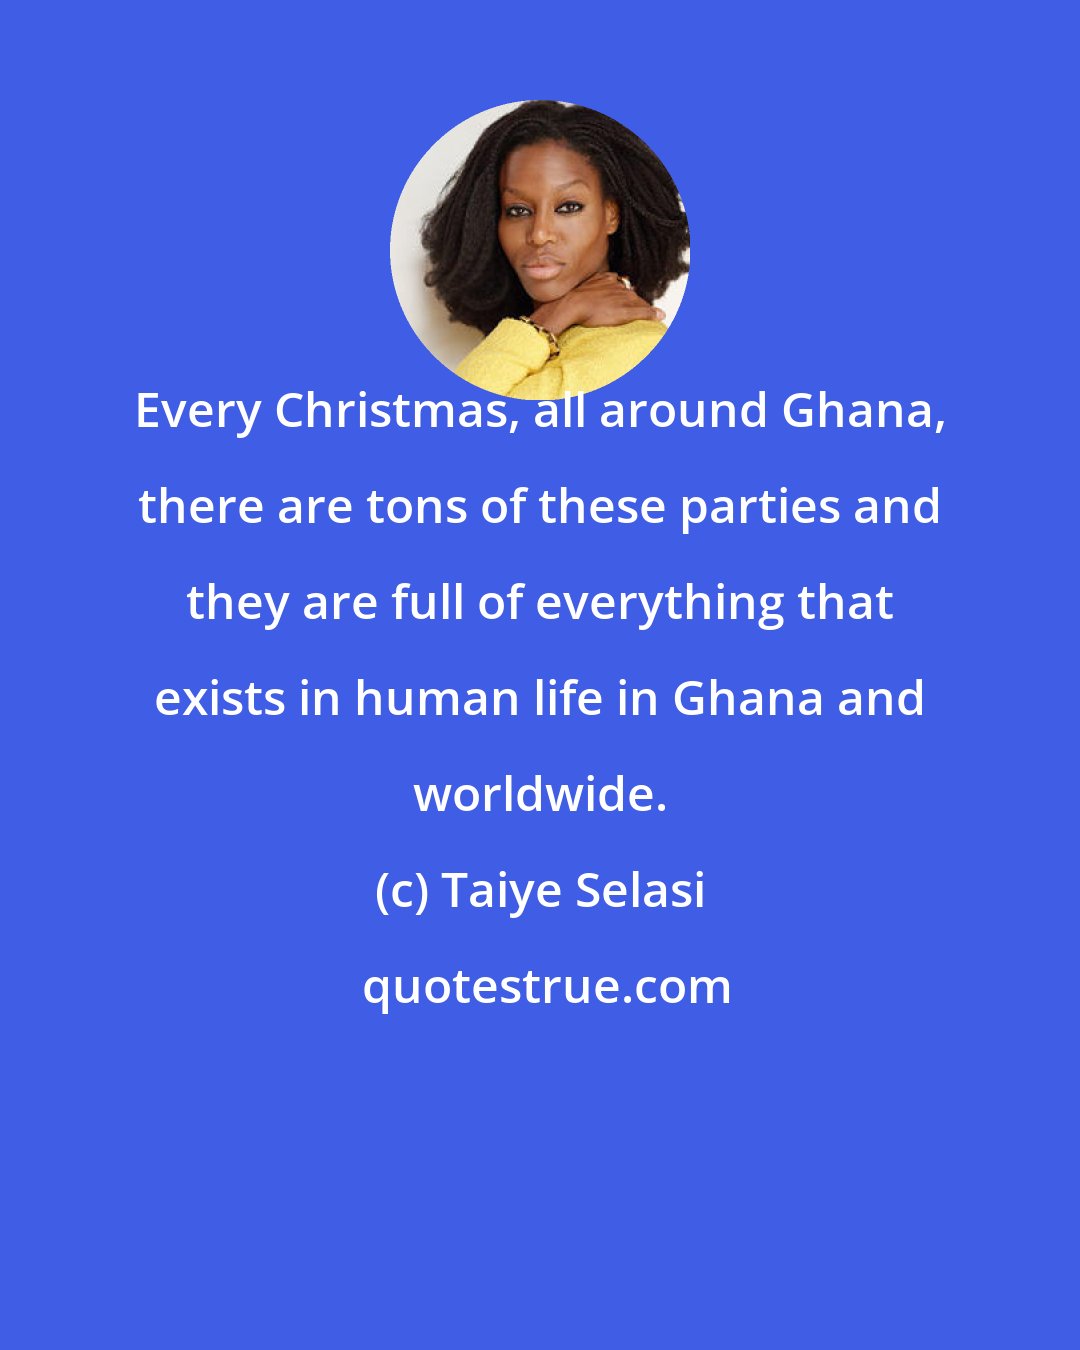 Taiye Selasi: Every Christmas, all around Ghana, there are tons of these parties and they are full of everything that exists in human life in Ghana and worldwide.